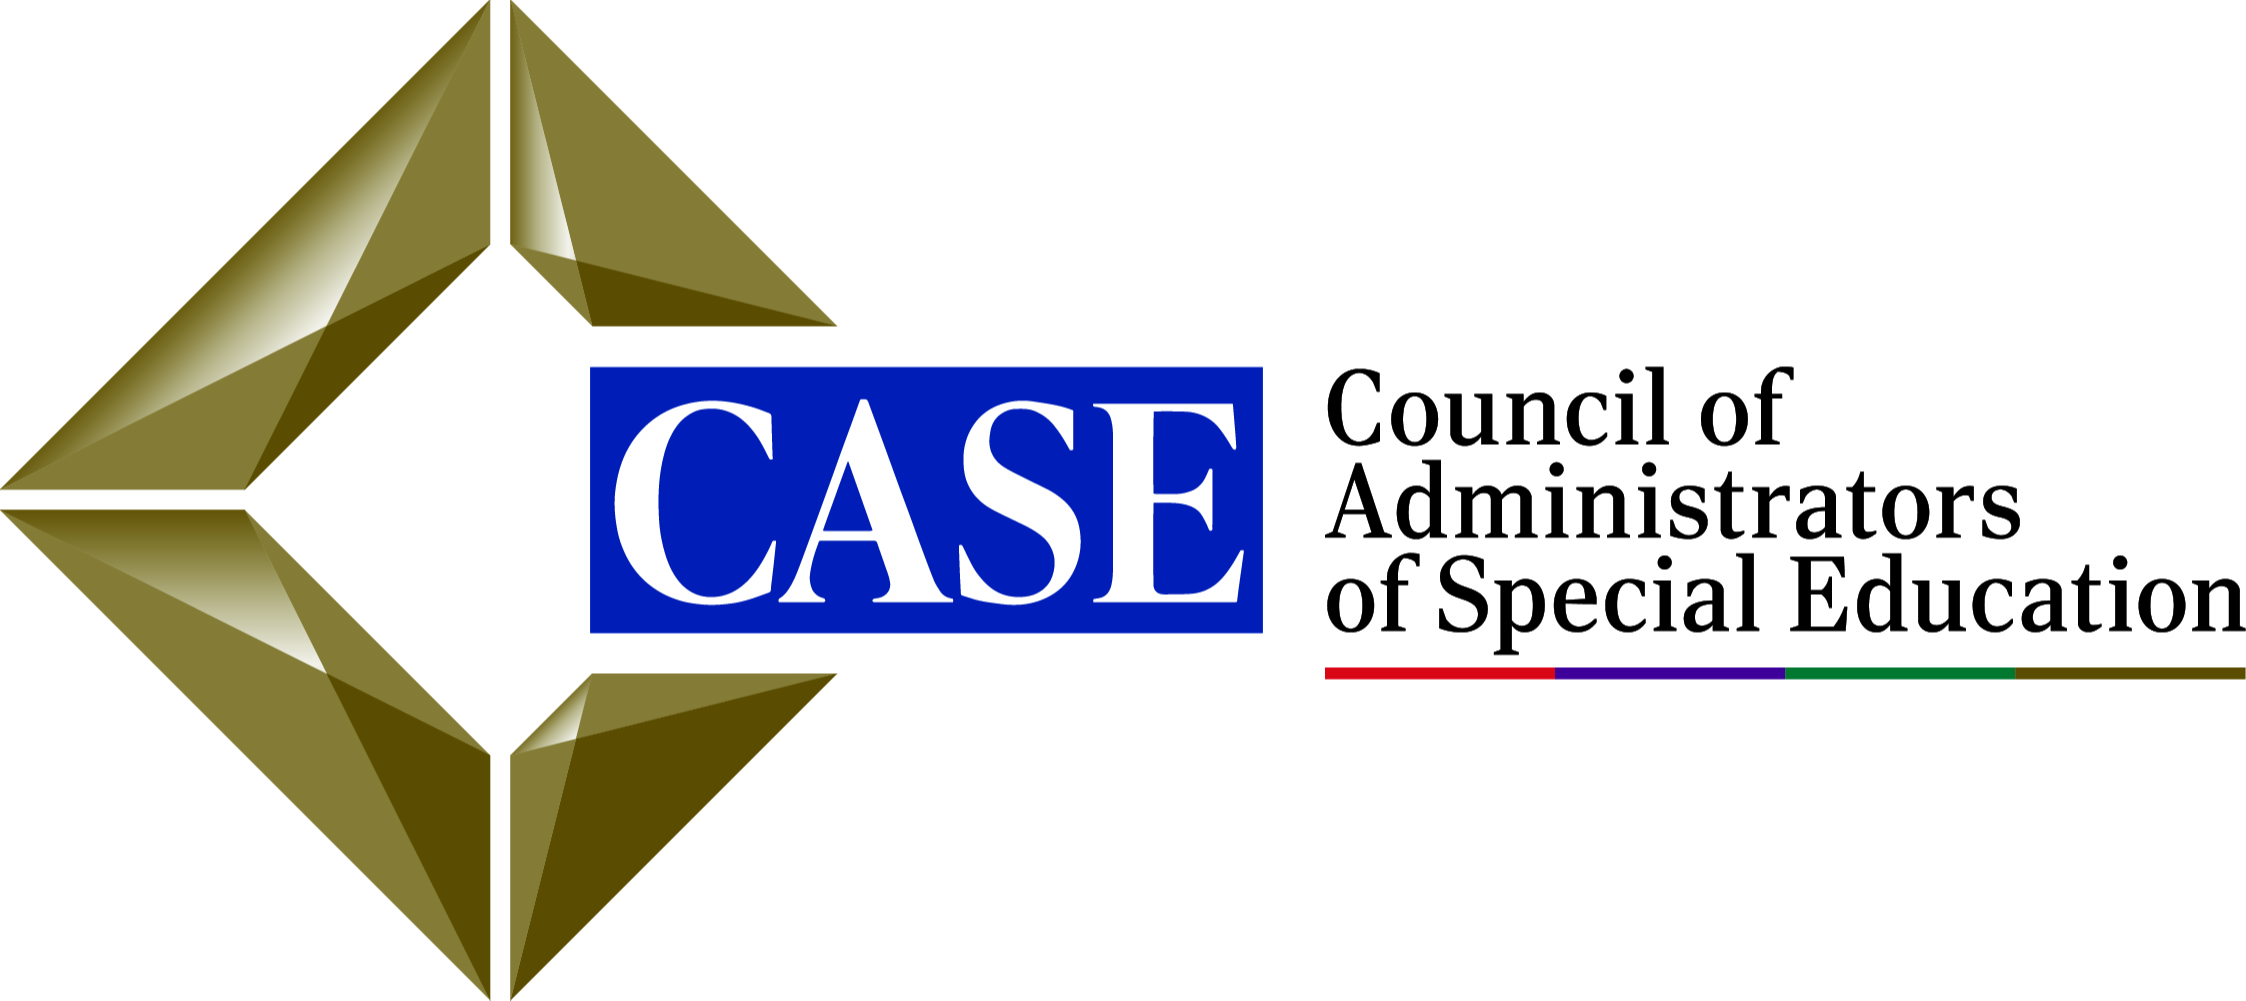 COUNCIL OF ADMINISTRATORS OF SPECIAL EDUCATION